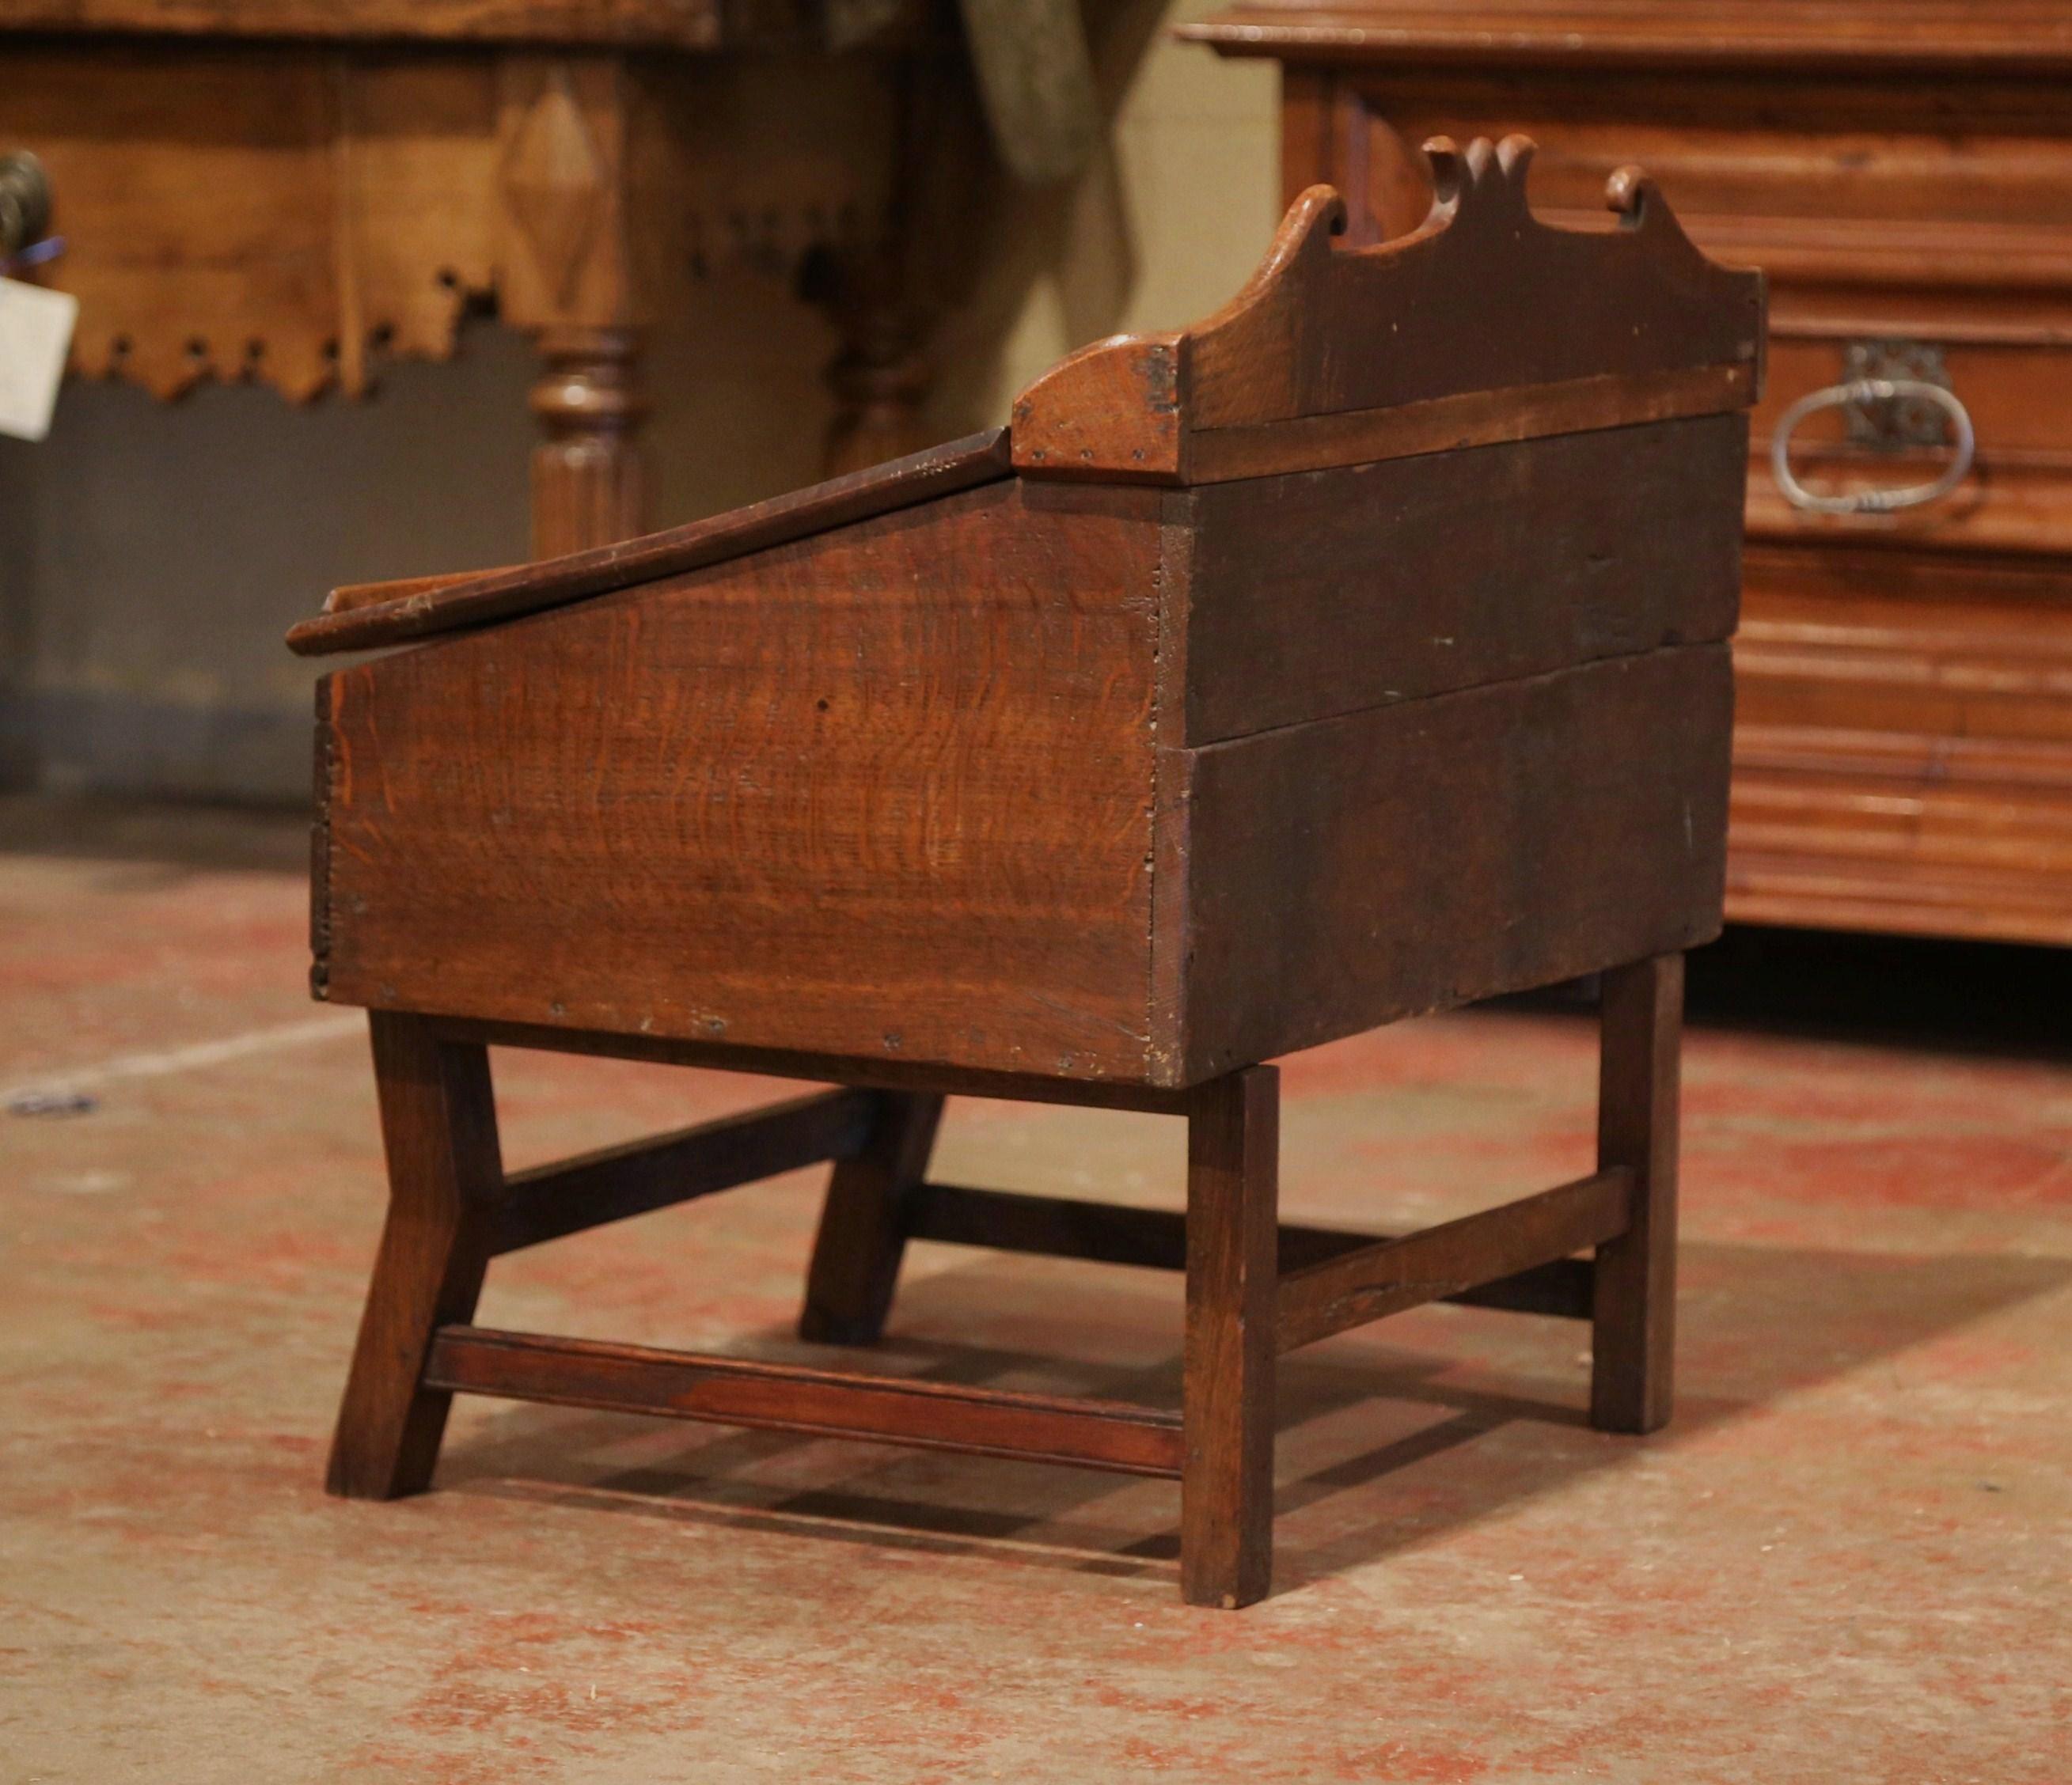 18th Century French Carved Walnut Desk on Legs with Slant Top and Inside Storage For Sale 3